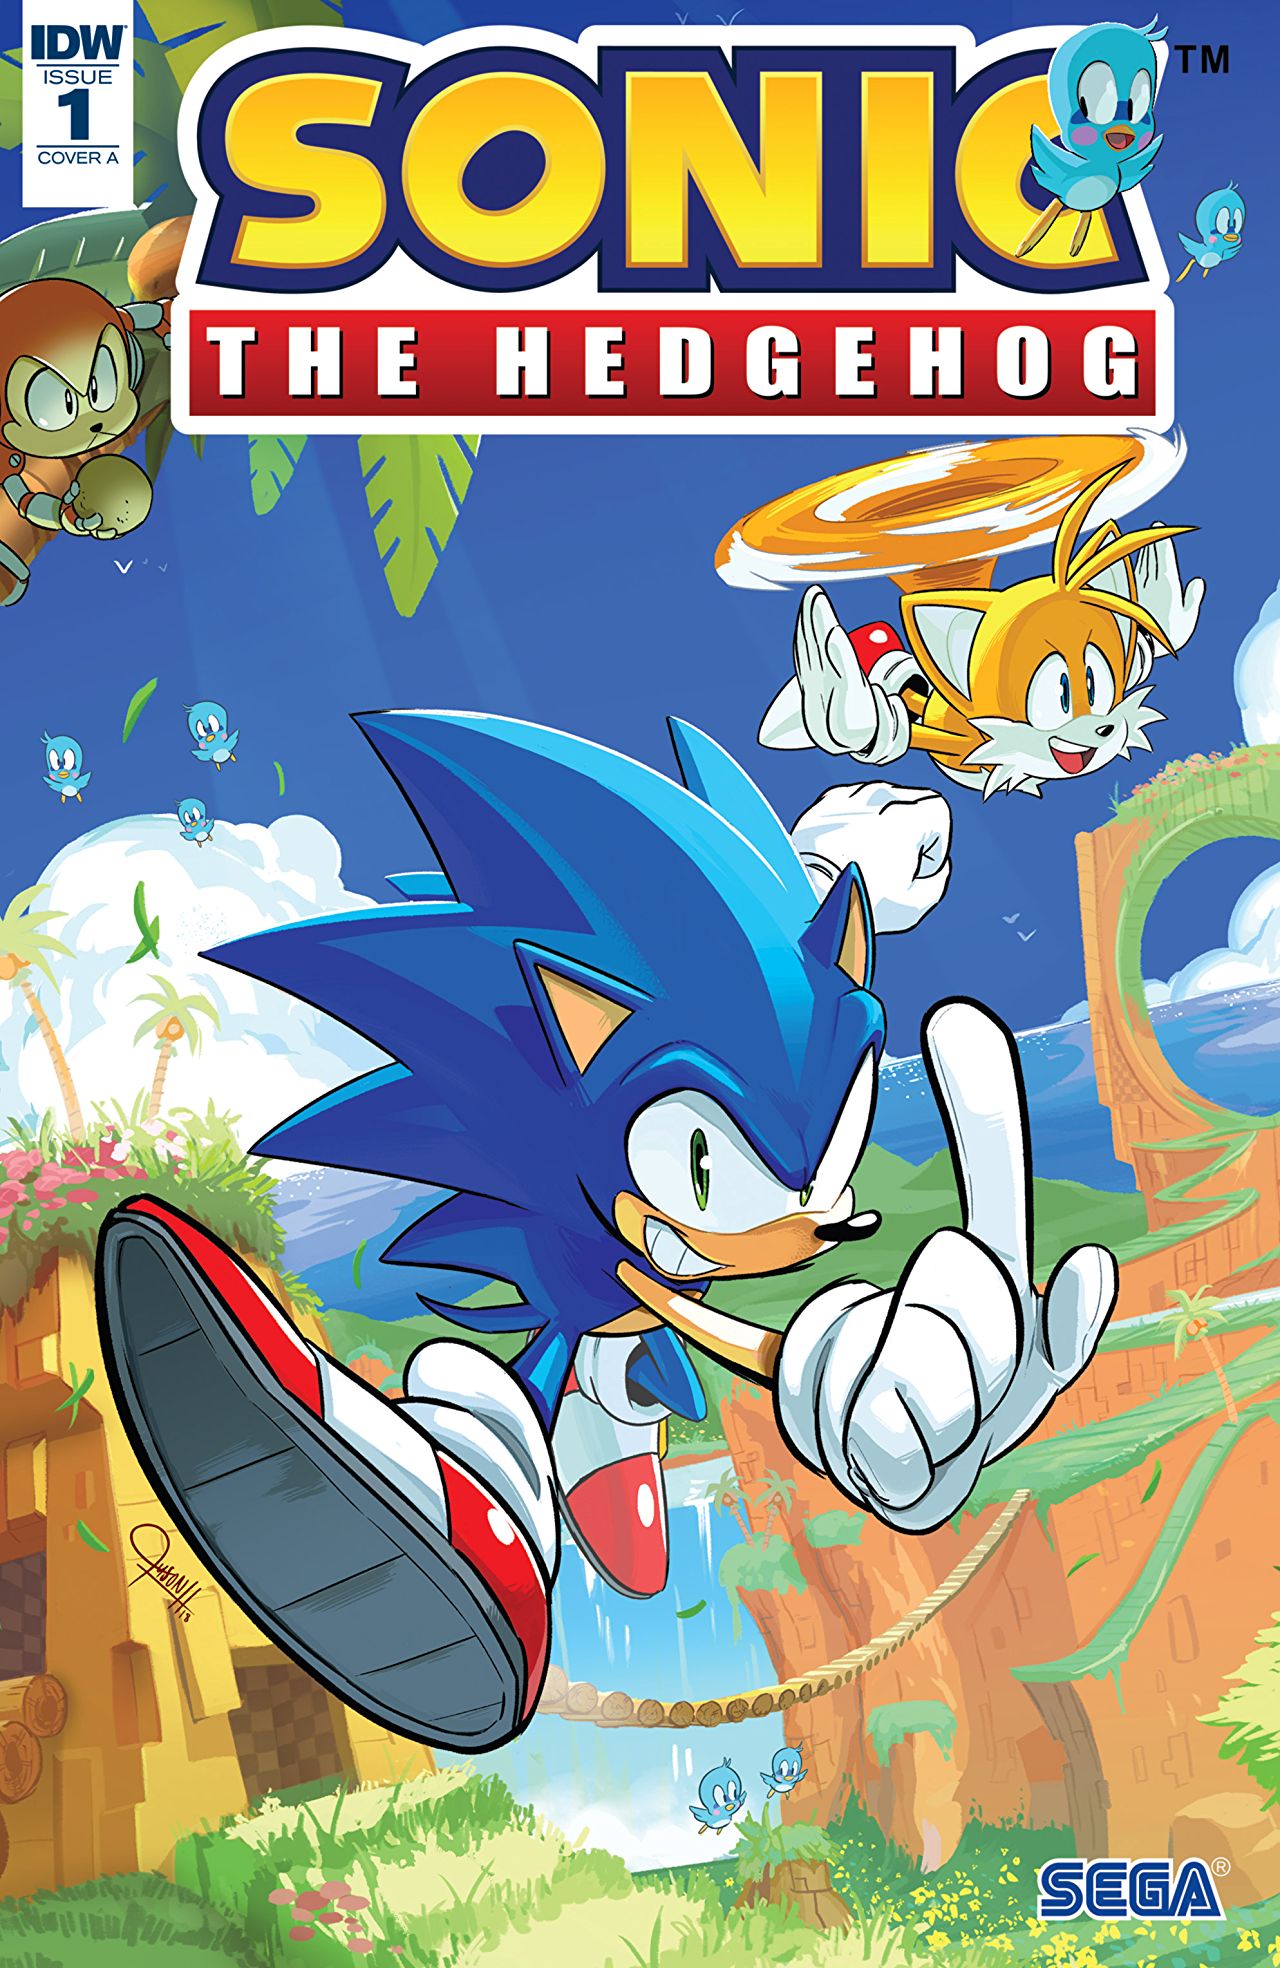 Sonic the Hedgehog #1 Review: IDW's new series is a worthy successor | AIPT1280 x 1968